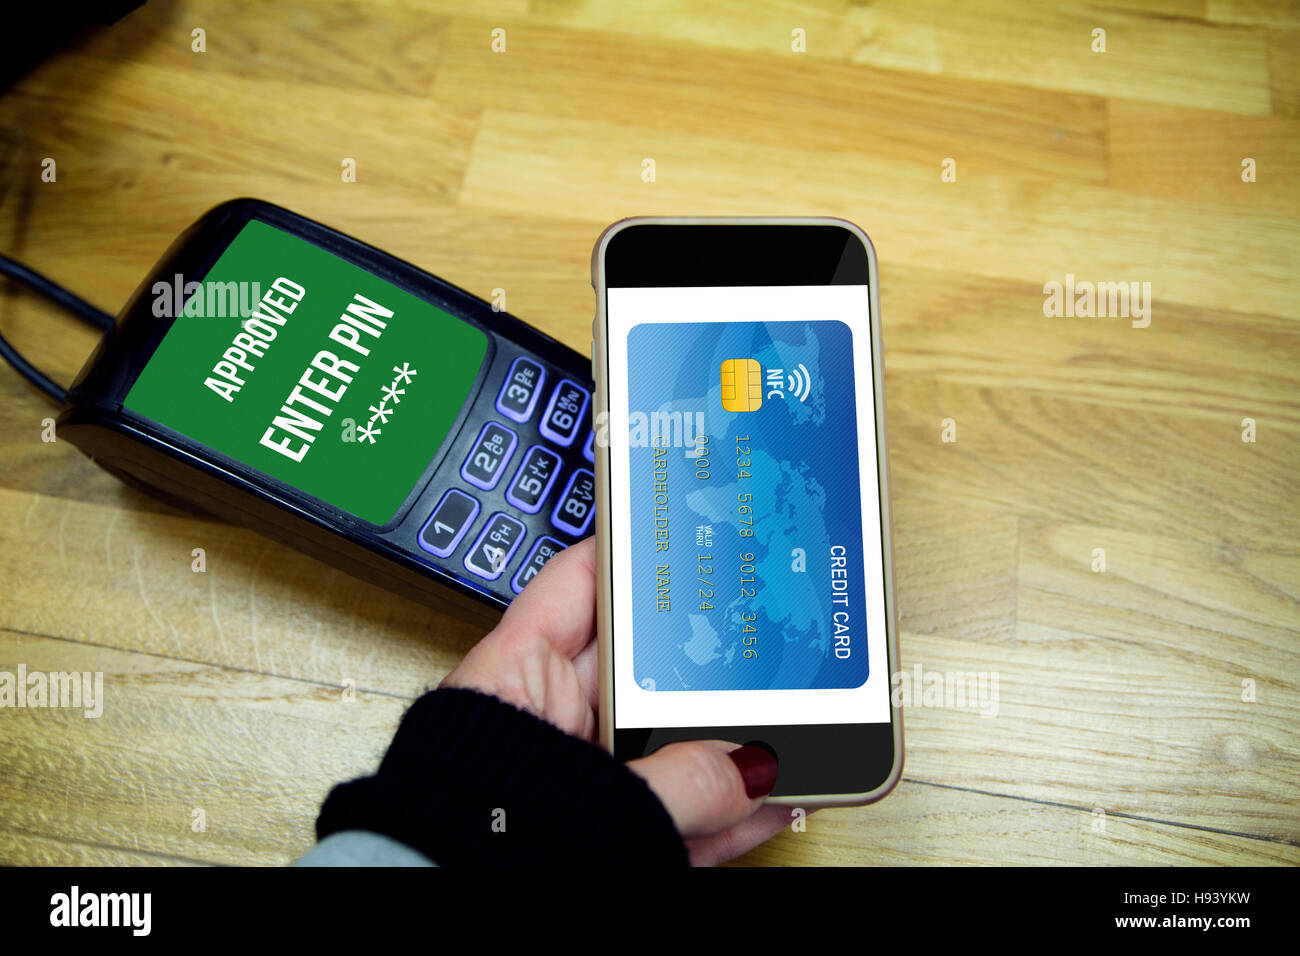 Woman making payment through smartphone via NFC contactless technology. All the graphics are made up. Stock Photo